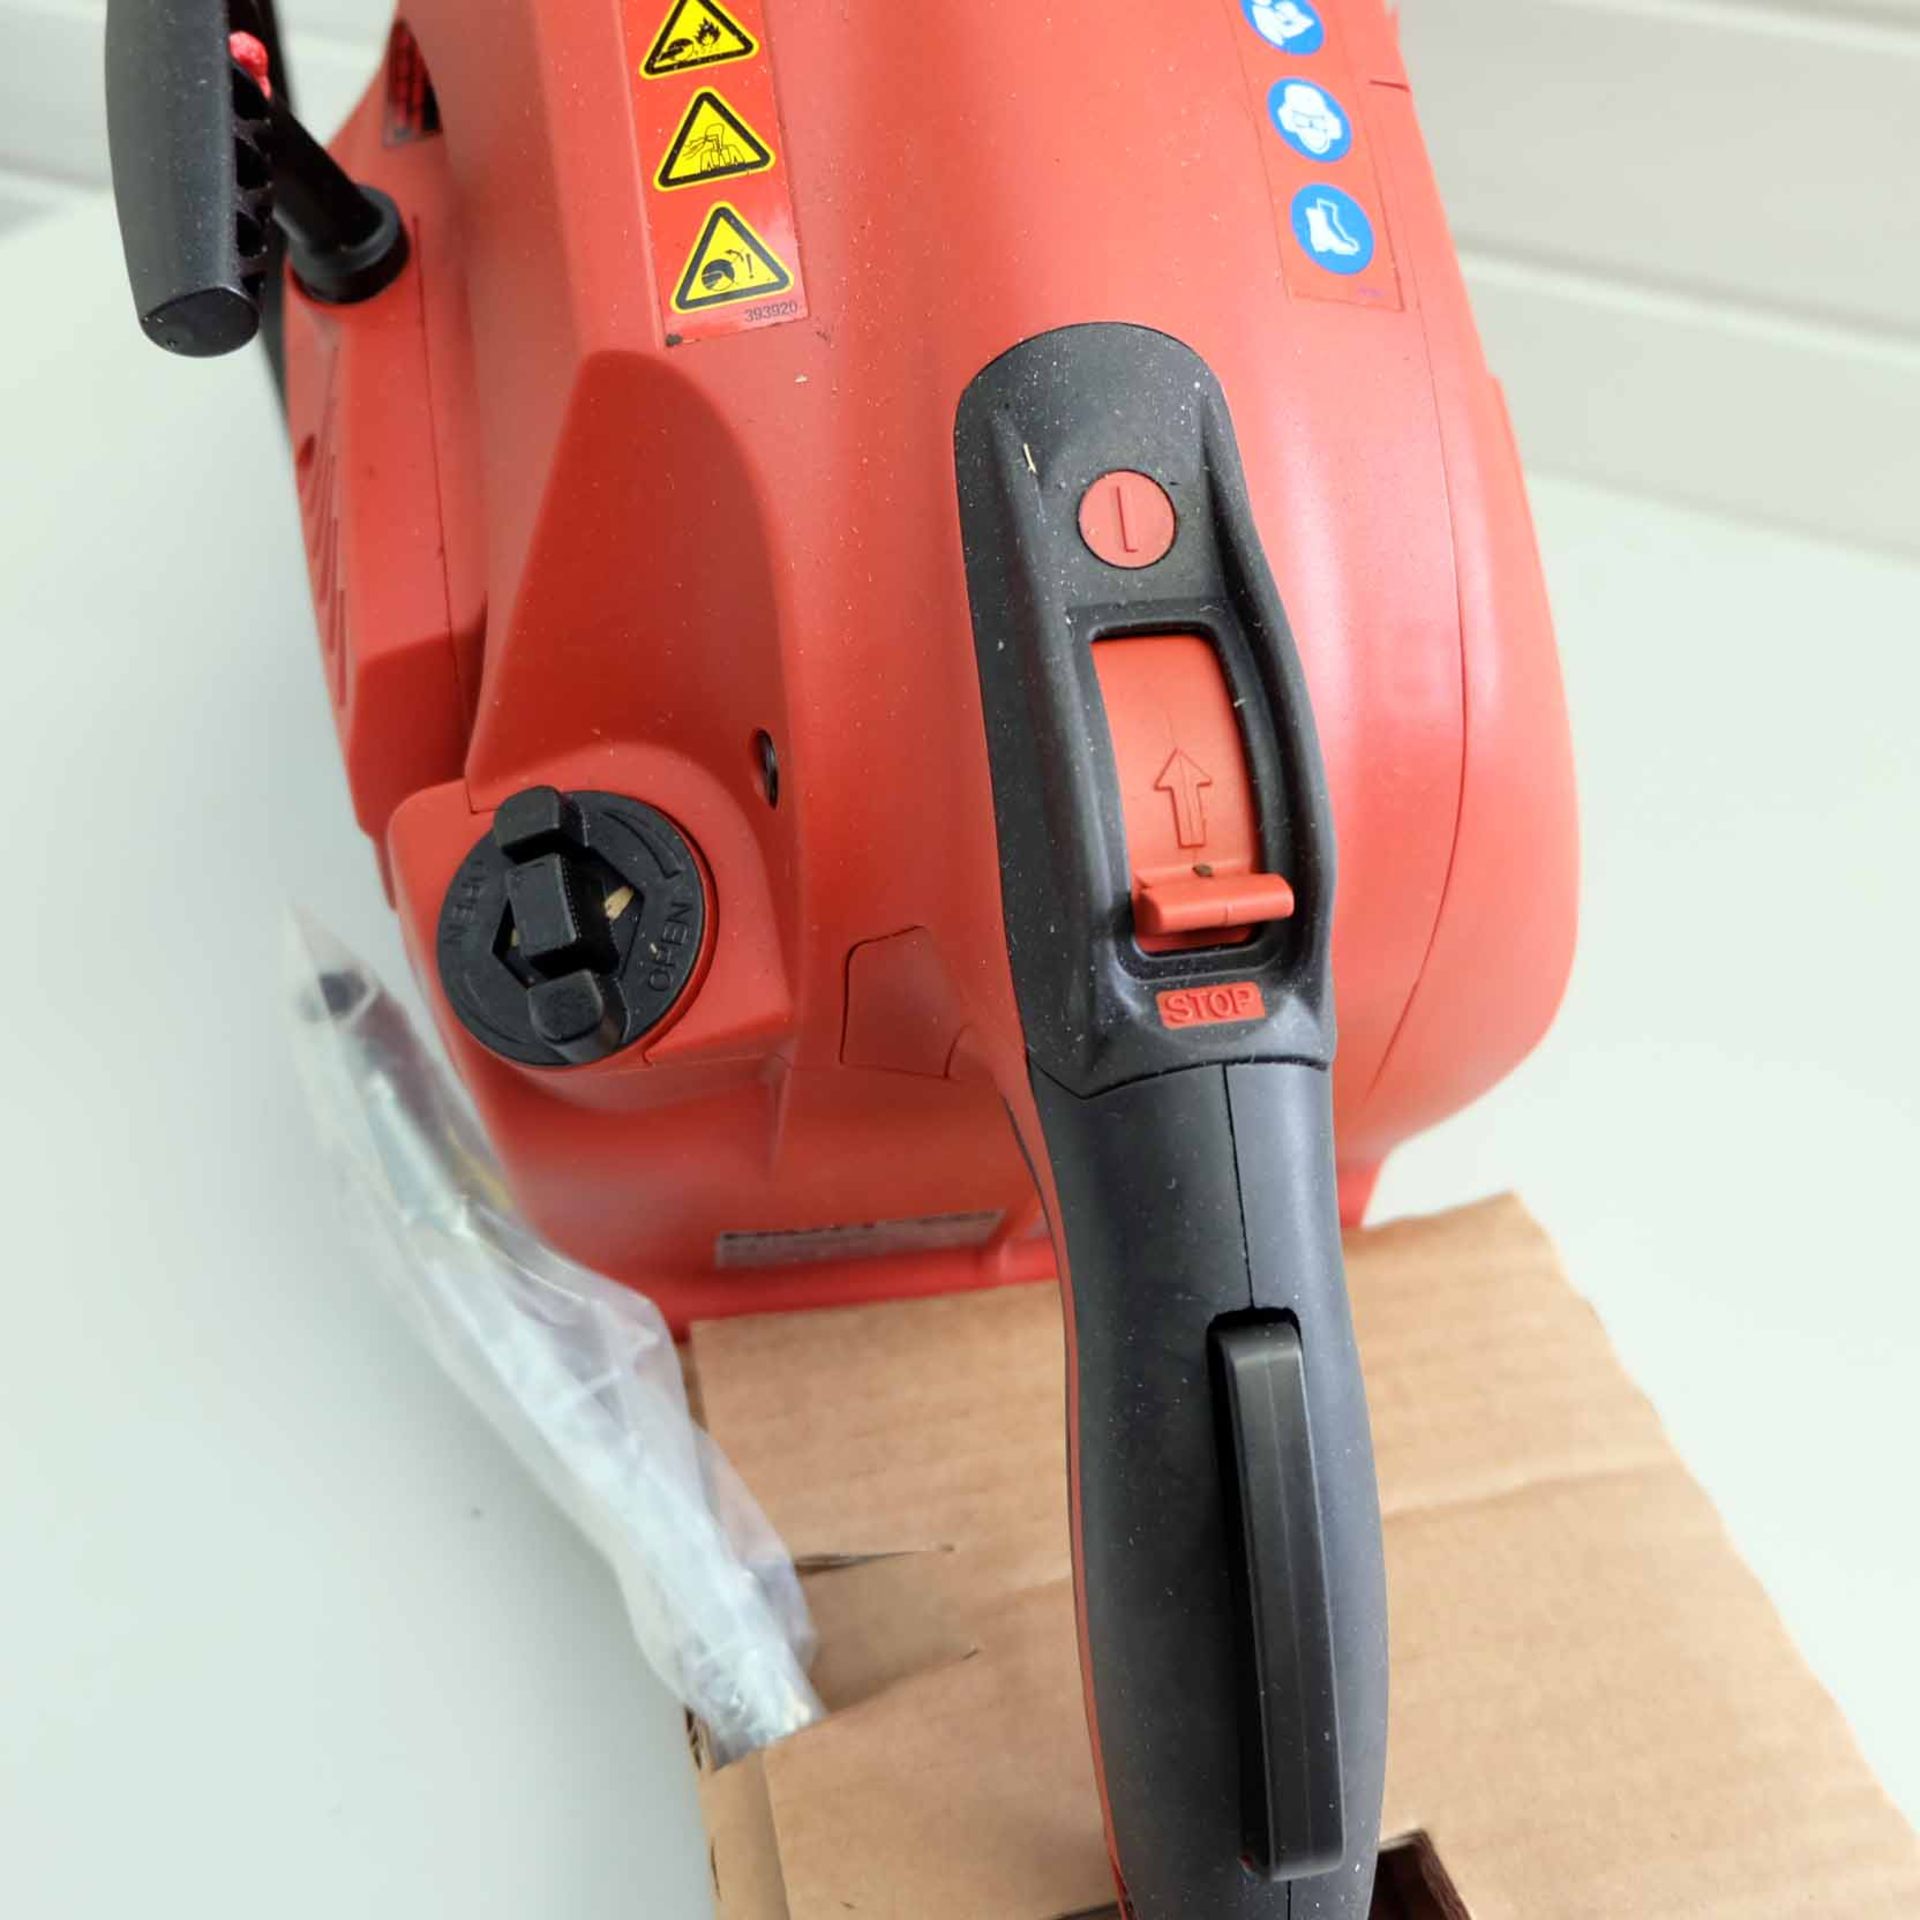 Hilti Hand Held Gas Saw. Model DSH 900-X 16". Complete With SP-16"x1" Blade. Easy Start Auto-Choke S - Image 10 of 25